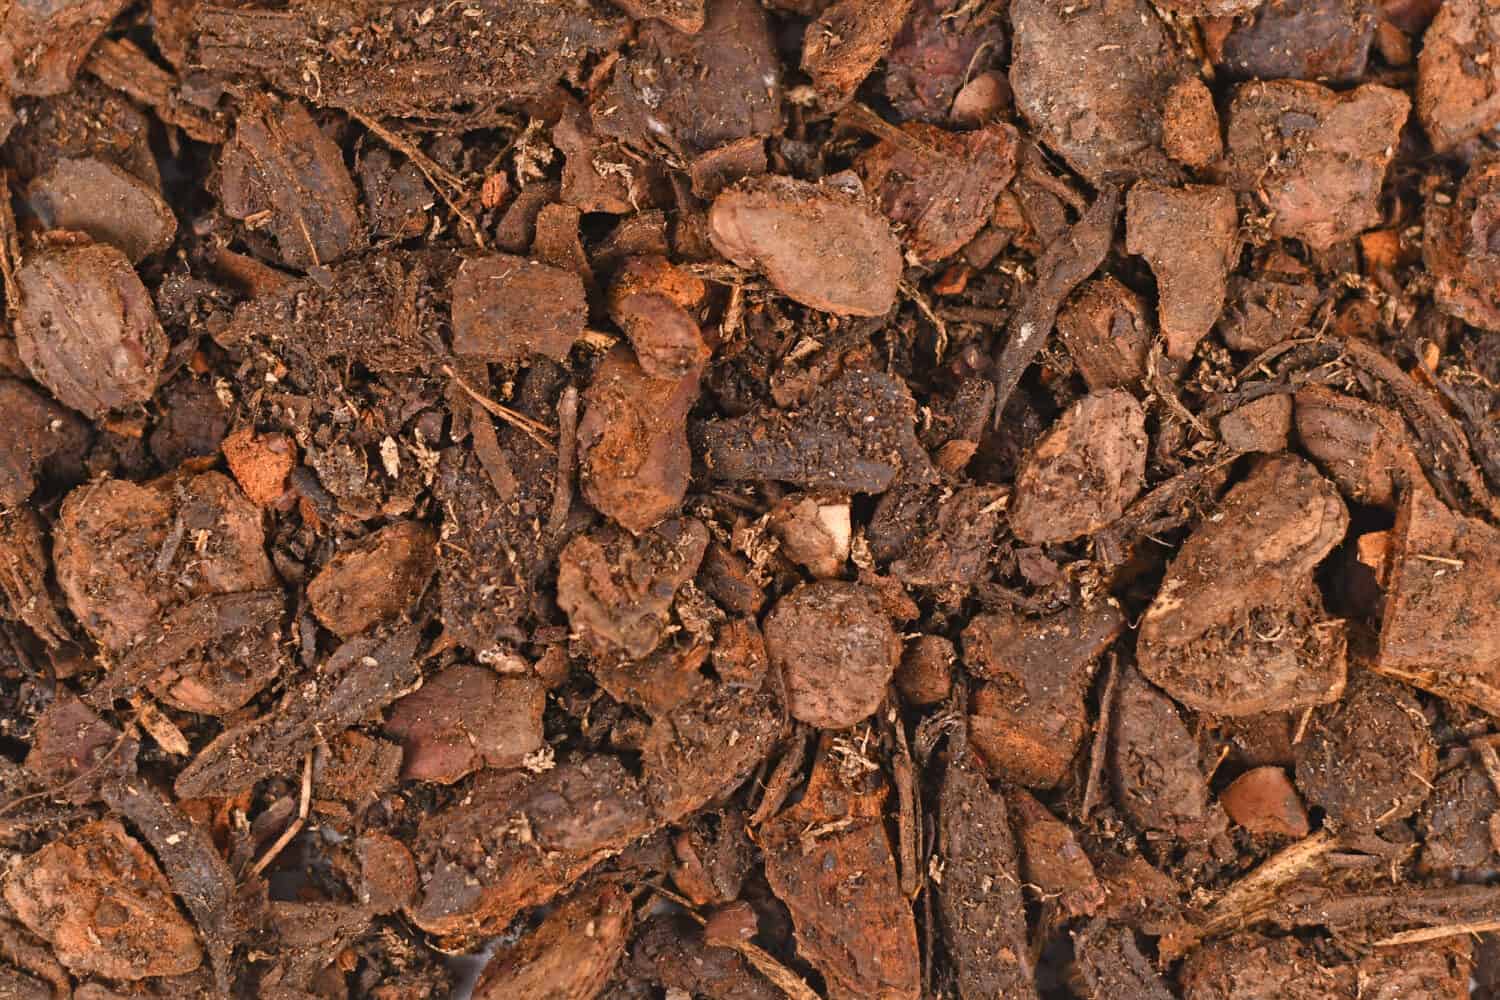 Top view of Orchid plant potting soil mix consisting of soil and chunky fir bark pieces